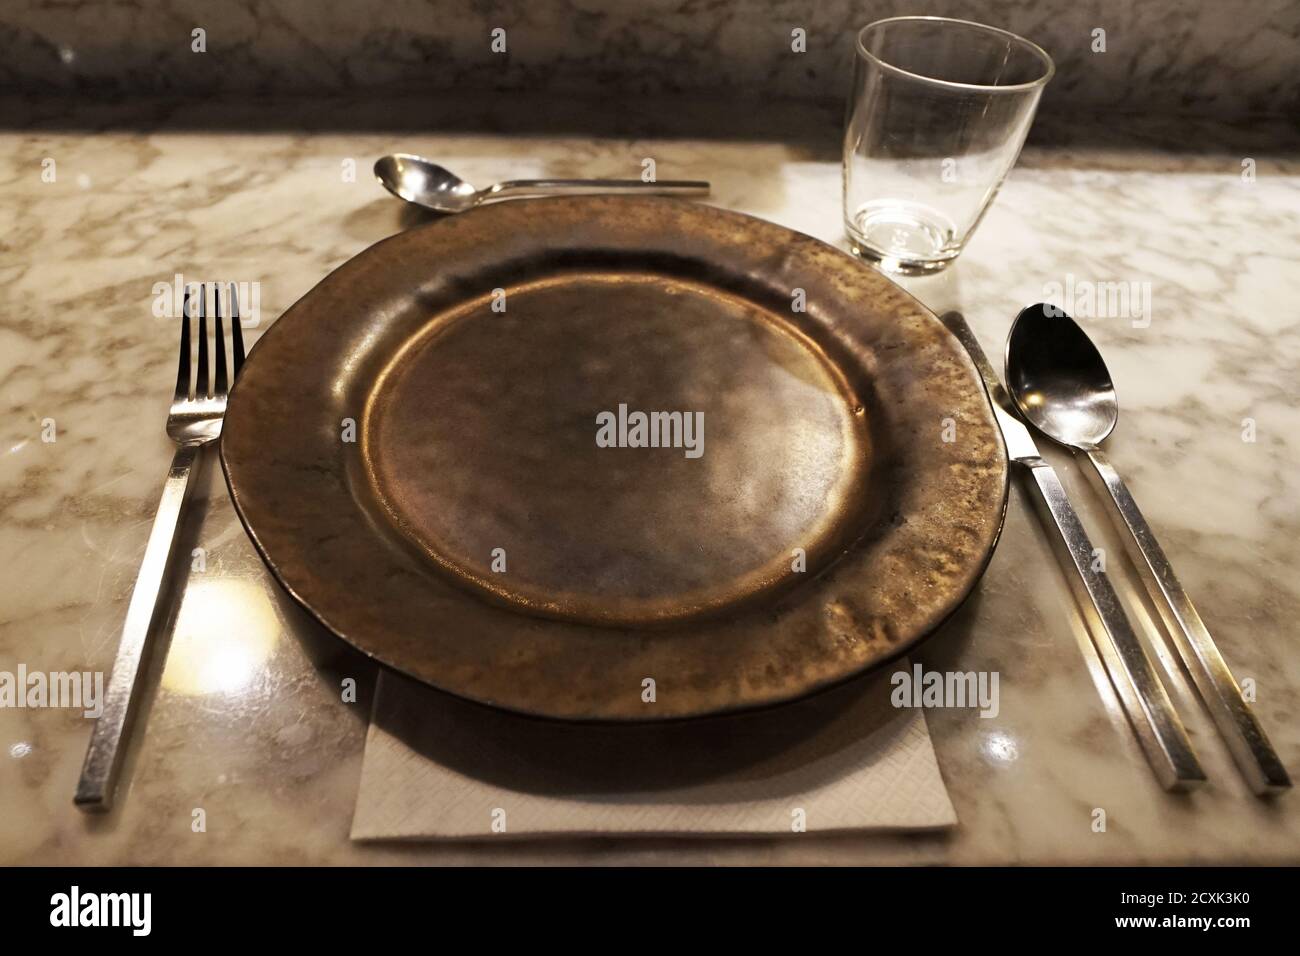 Close up black porcelain plate and stainless steel utensils arranged on marble bar table Stock Photo